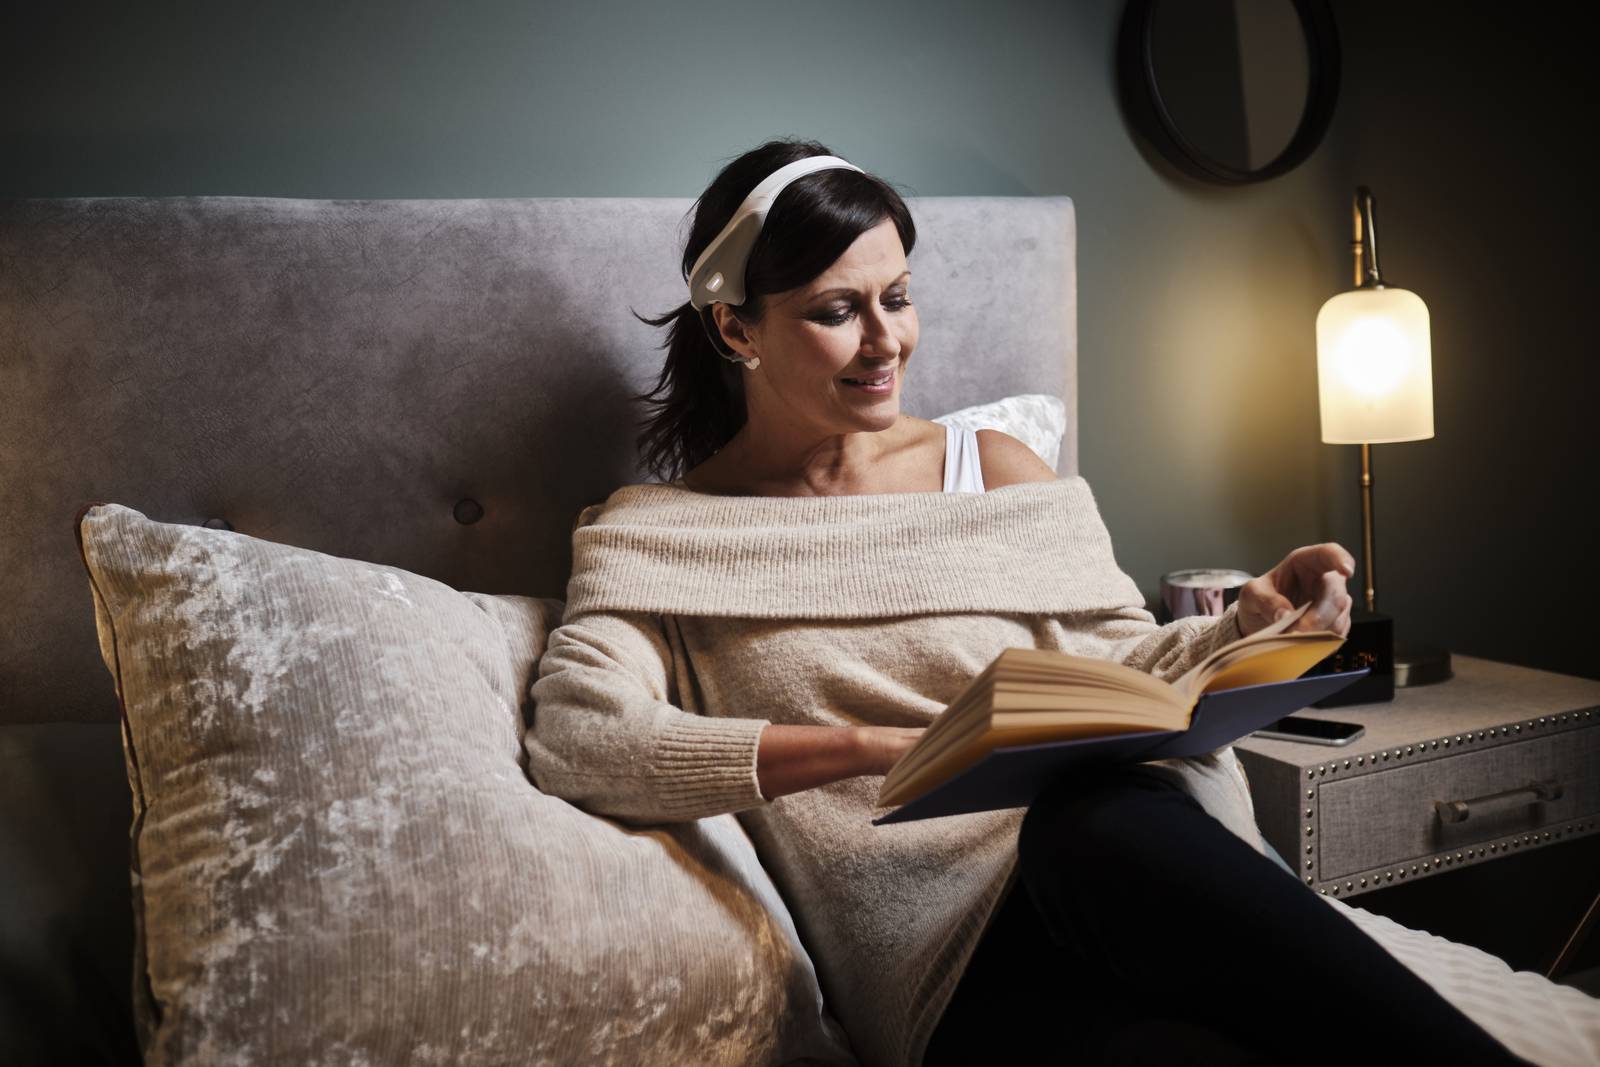 Woman lying on a bed reading while wearing the modius band on her head.